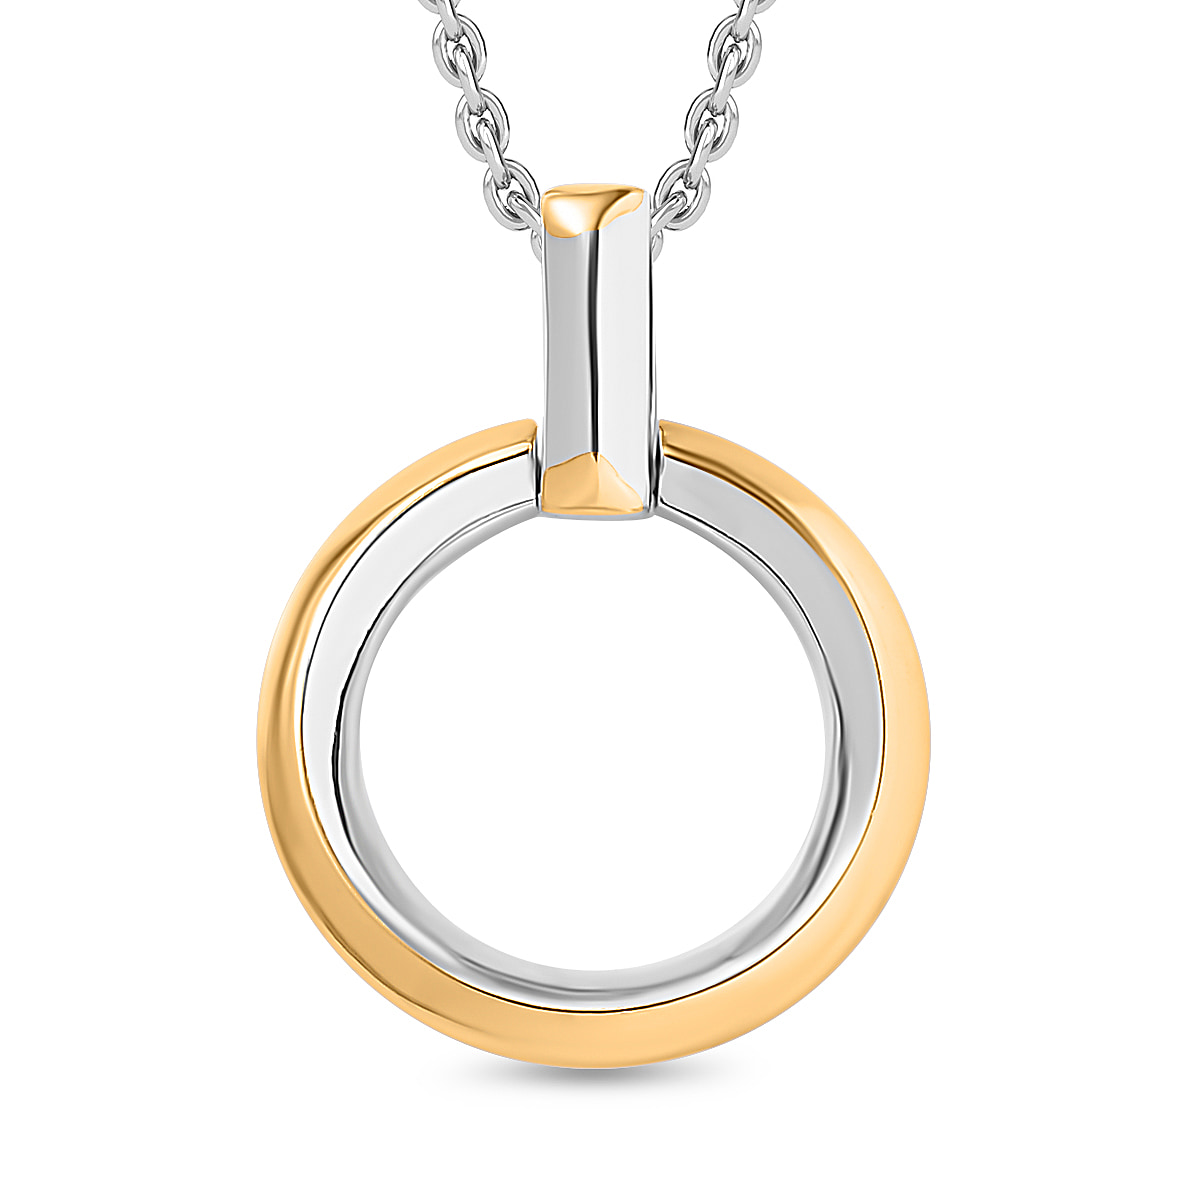 Designer Inspired Circle Pendant in Platinum and 18K Yellow Gold Vermeil Plated Sterling Silver with Chain (Size 20)